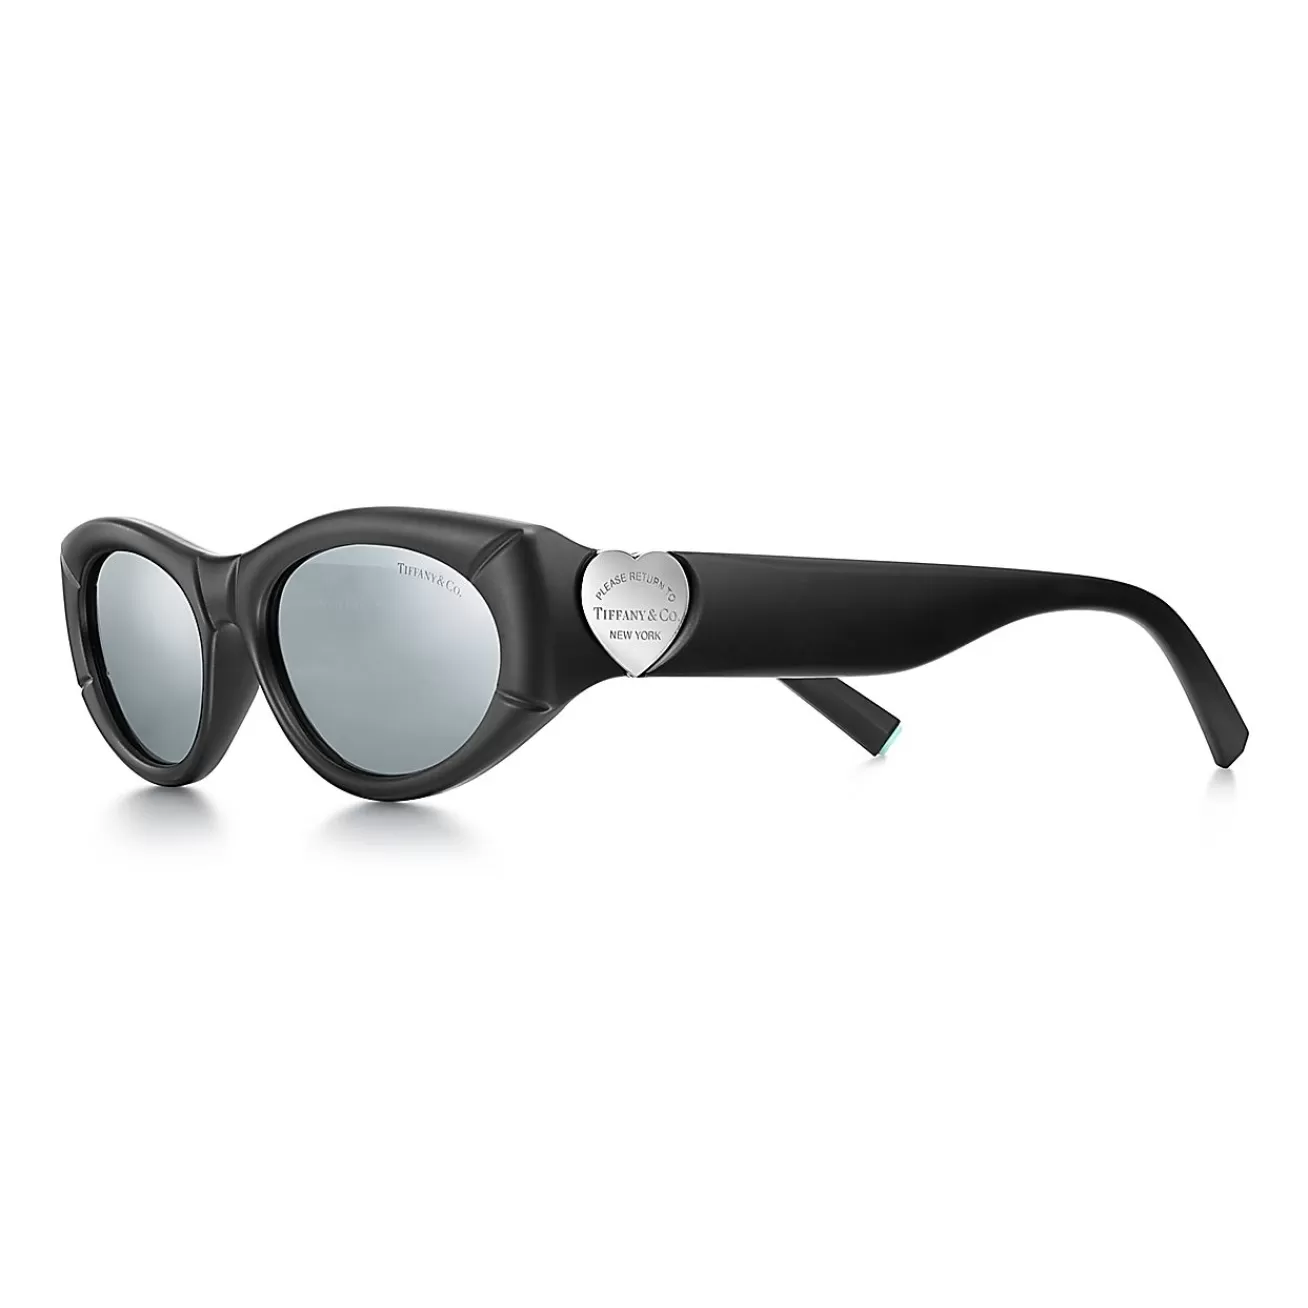 Tiffany & Co. Return to Tiffany® Sunglasses in Black Acetate with Gray Mirrored Lenses | ^Women Return to Tiffany® | Sunglasses